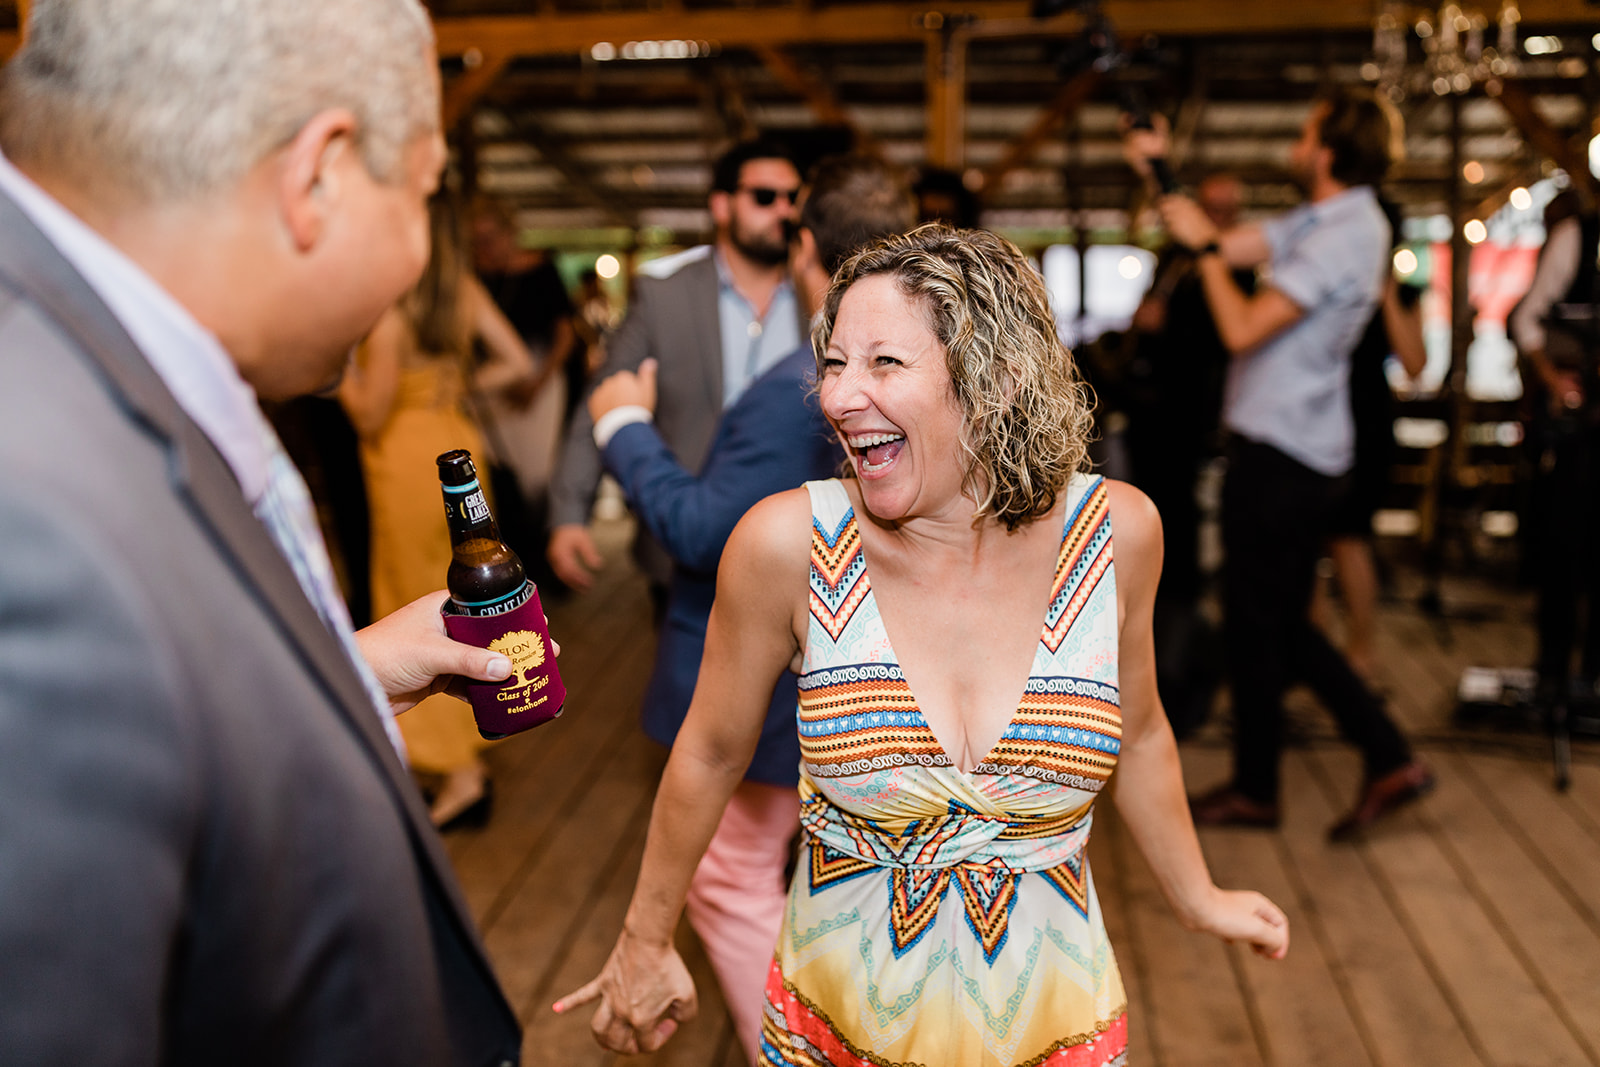 guests dance at reception 